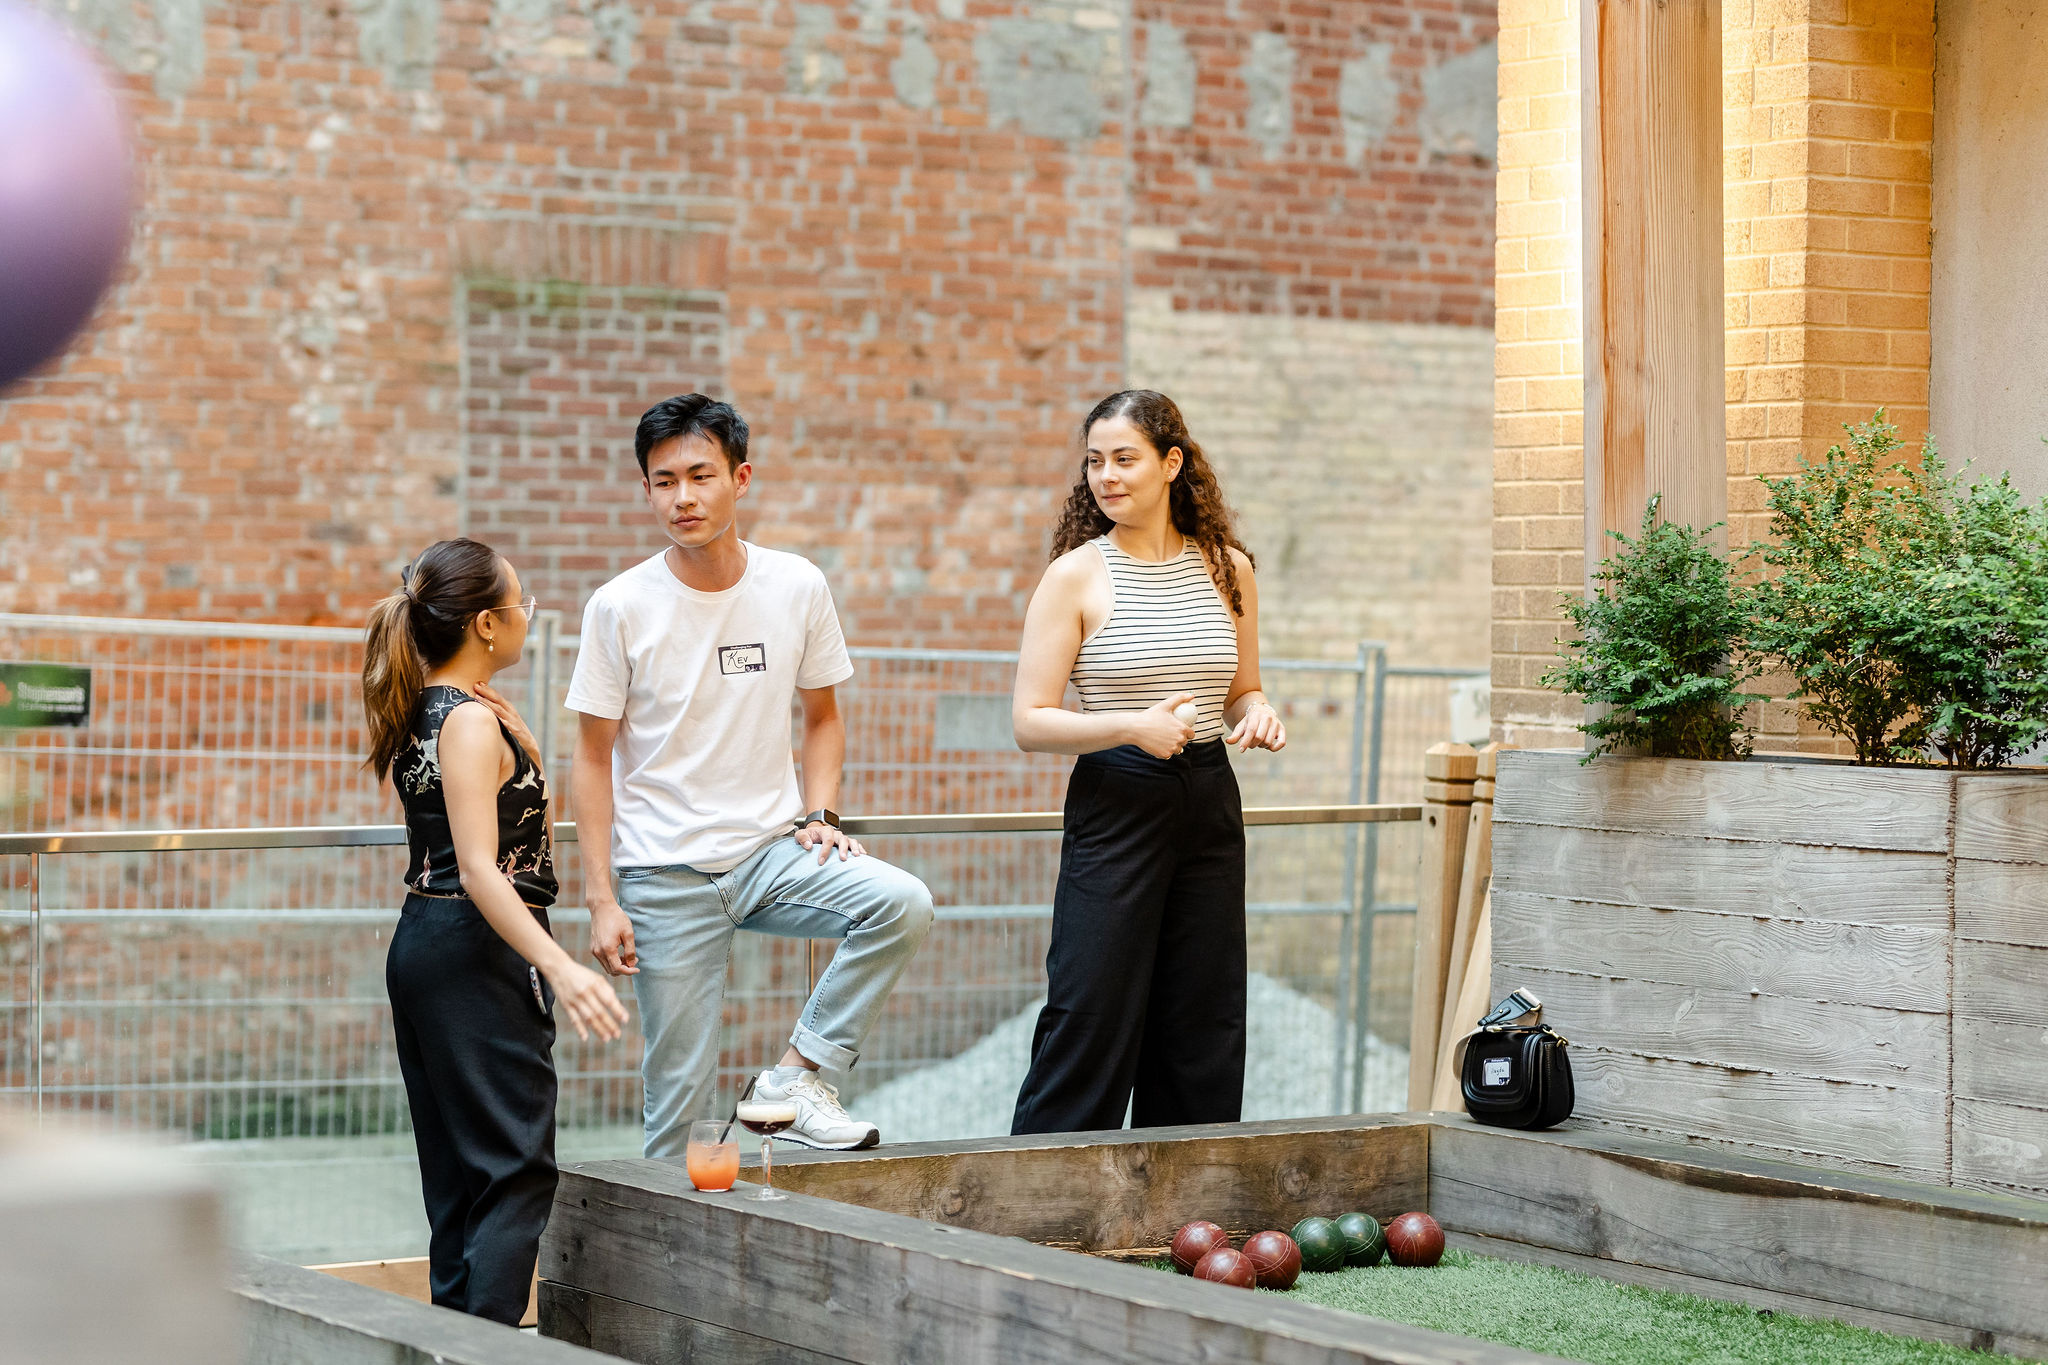 Individuals playing bocce ball in a courtyard.